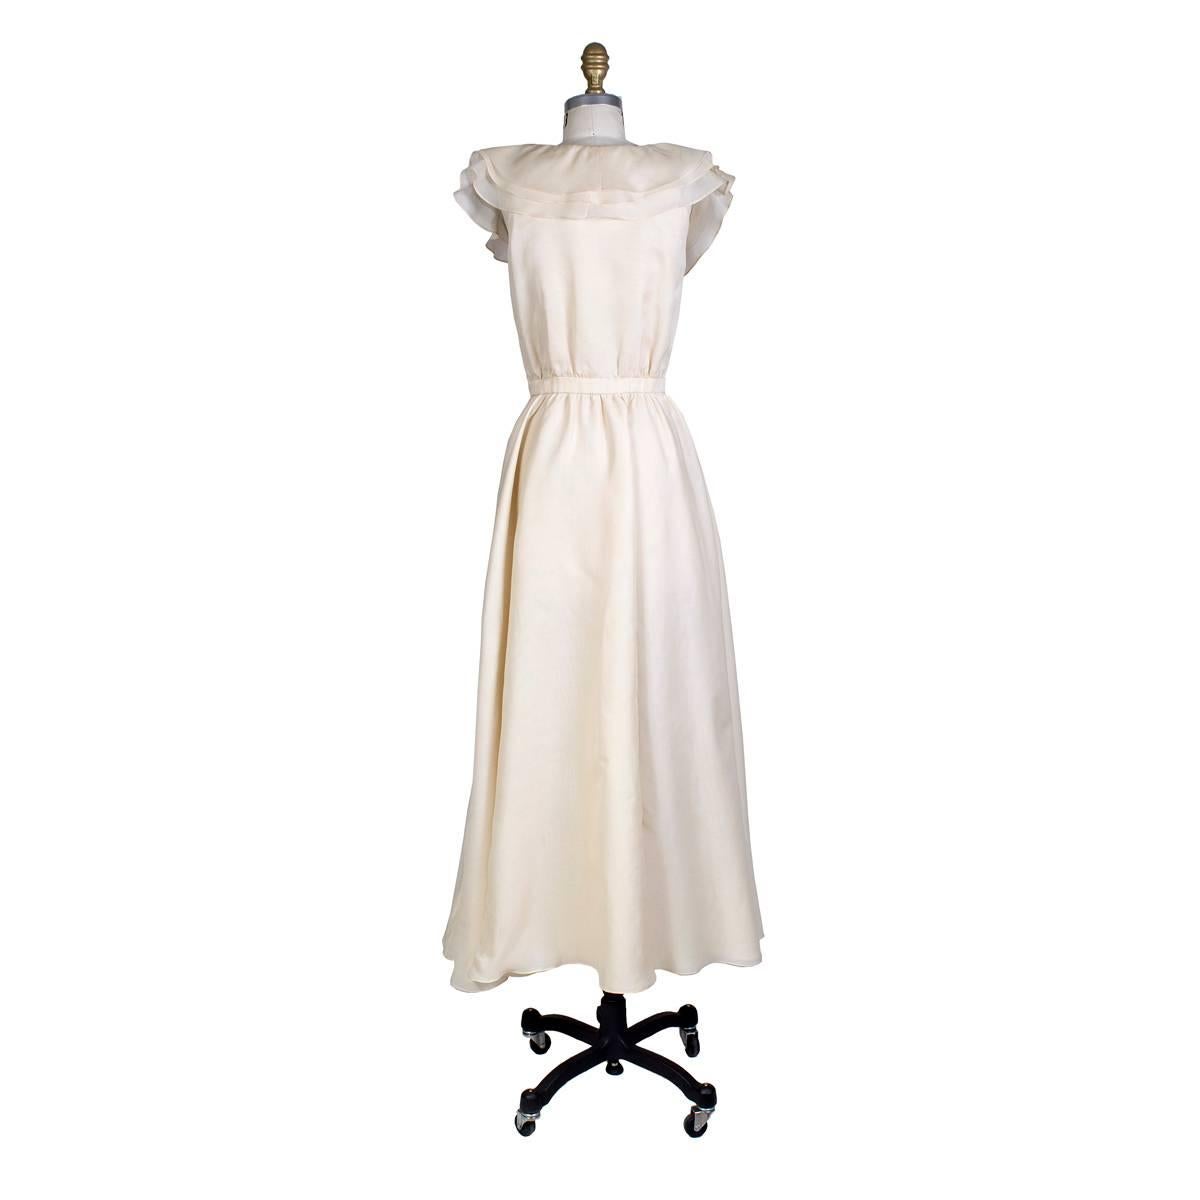 Vintage dress by Halston circa 1970s
Cream colored heavy organza
Wrap style in front with hook closures inside of waist
3 layered large collar and multi layered skirt to create volume
Condition: Excellent vintage condition
Size/Measurements:
32